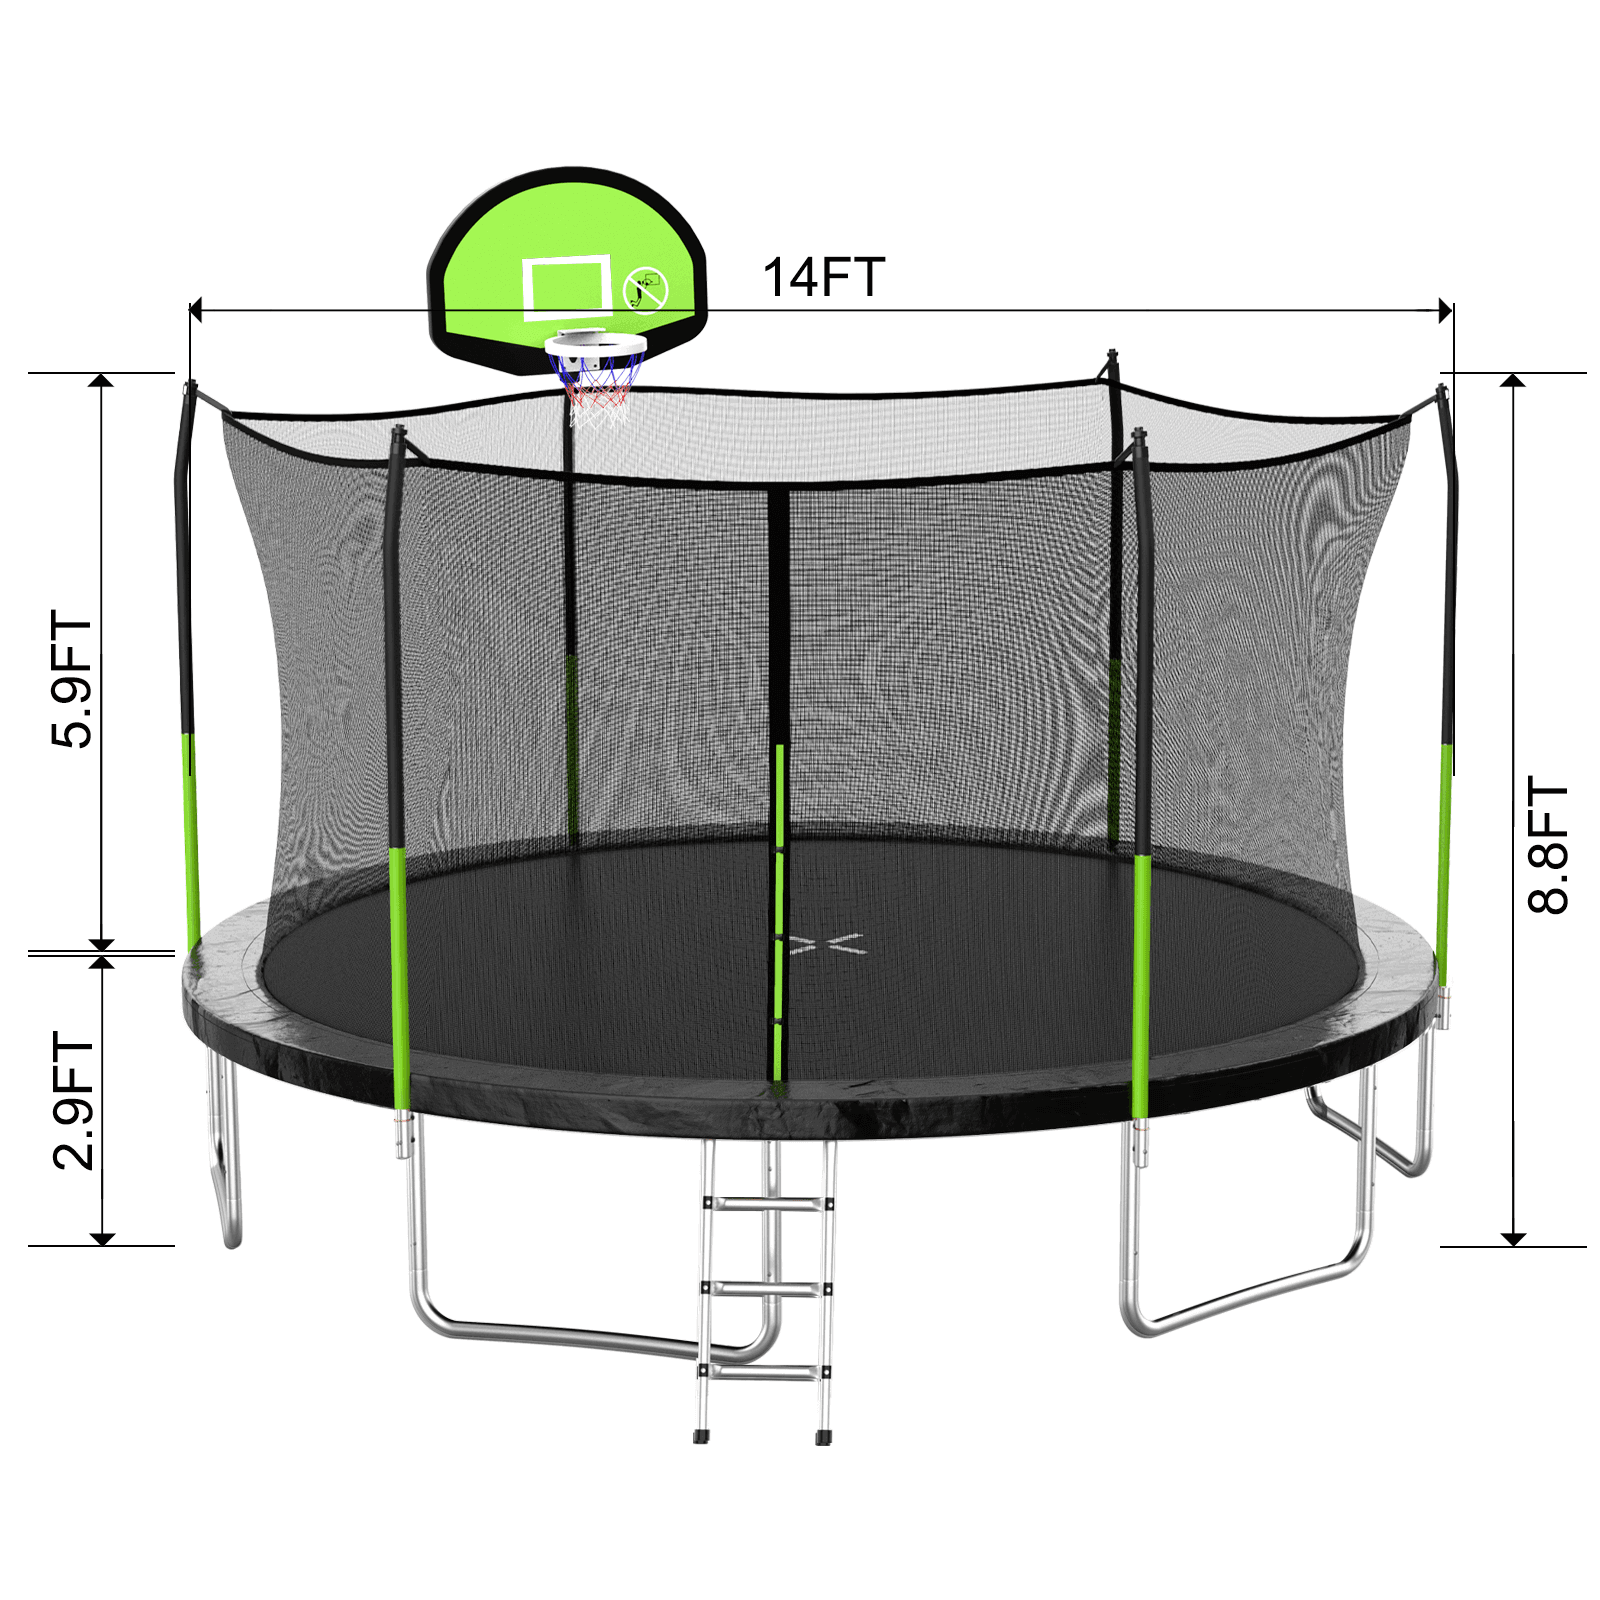 Aotob 14FT Green Jumping Trampoline with Basketball Hoop - Aotob